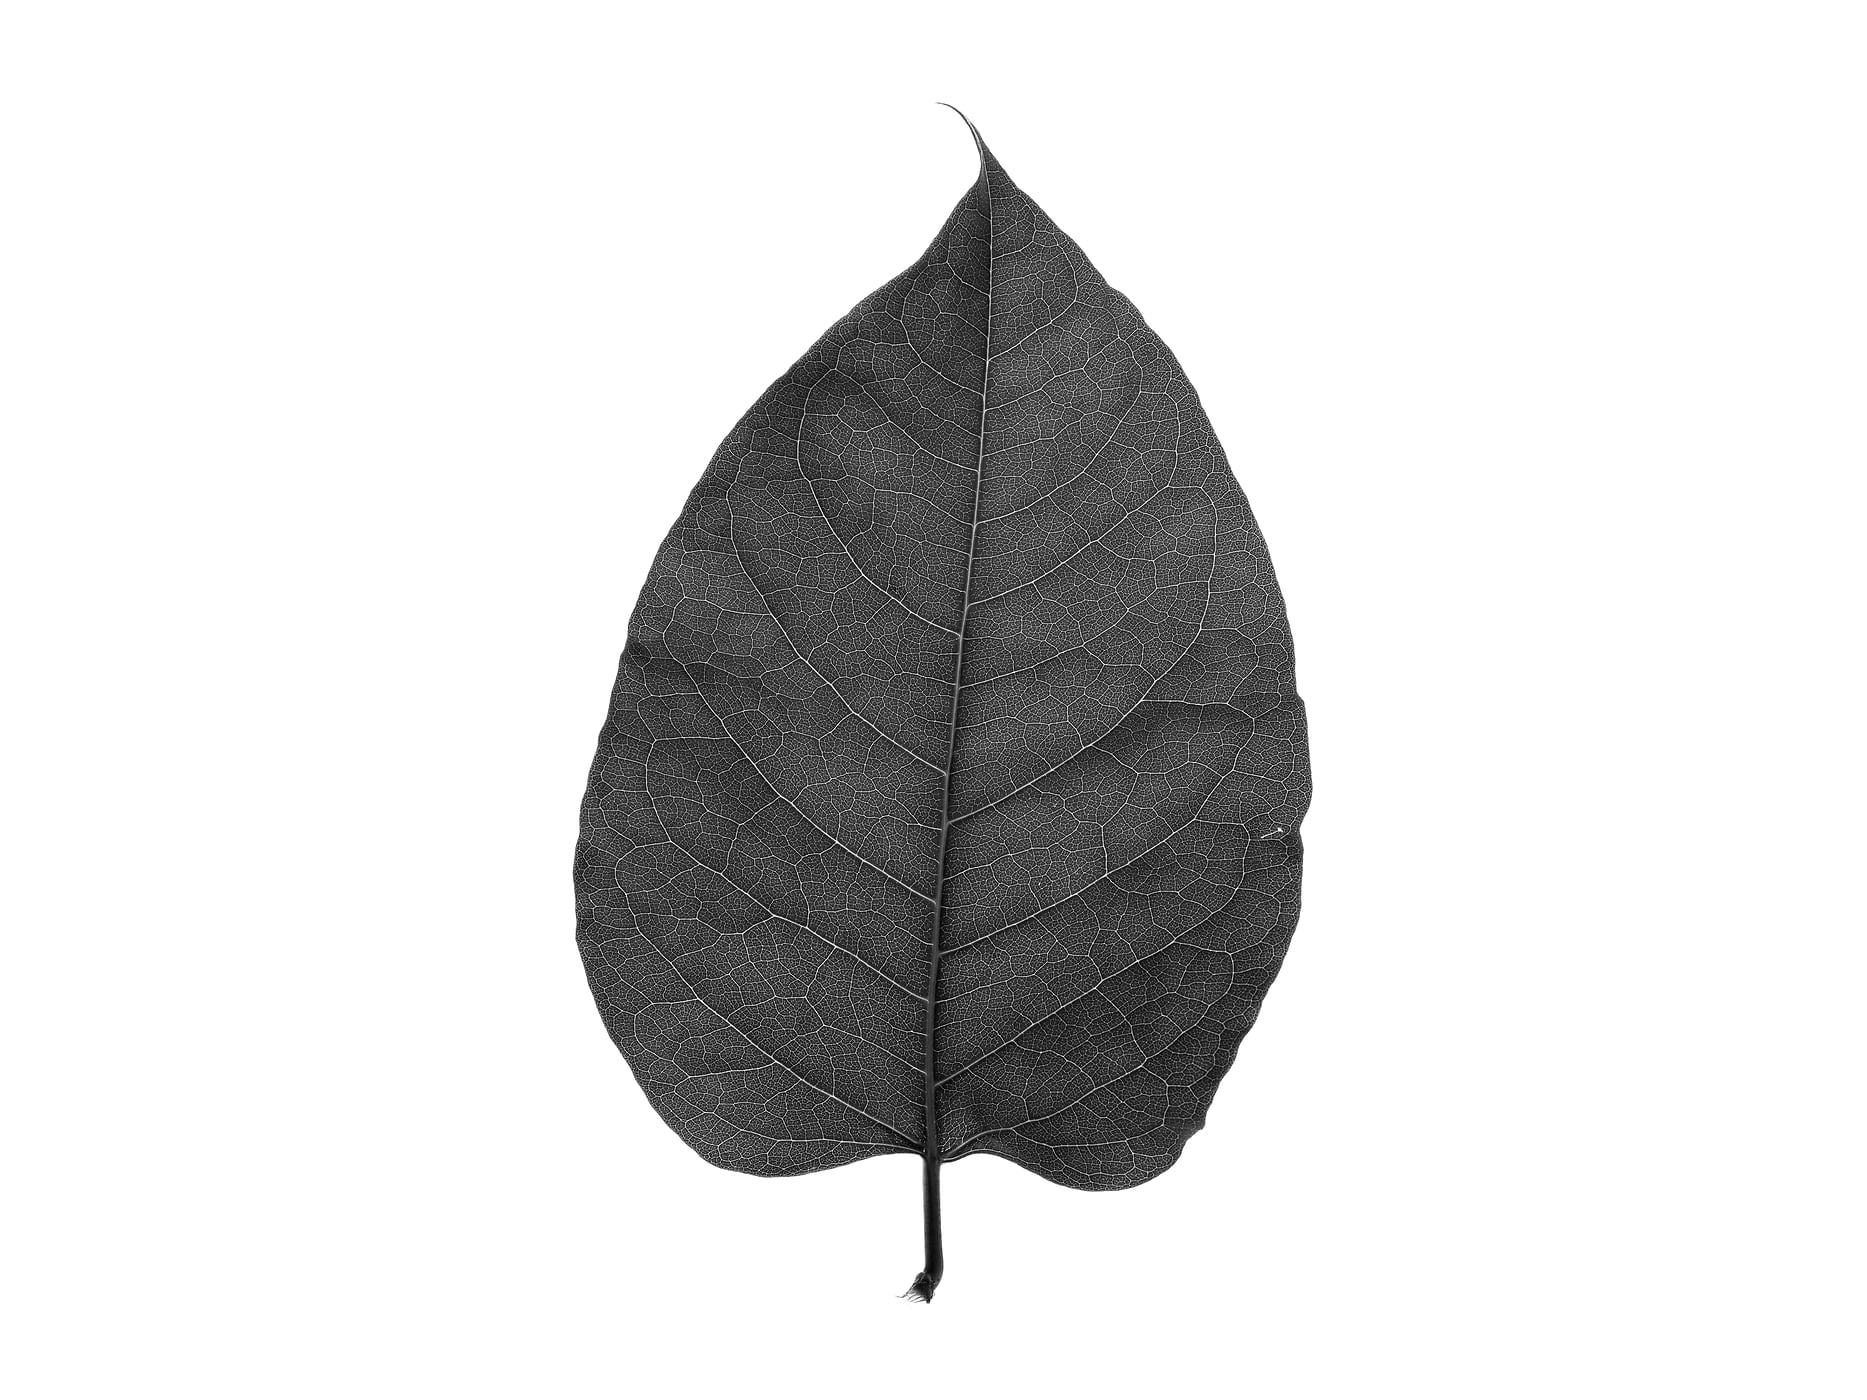 847 megapixels! A very high resolution, large-format VAST photo print of a single leaf; black and white nature photograph created by Scott Rinckenberger in Snoqualmie Falls Park, Snoqualmie, Washington.